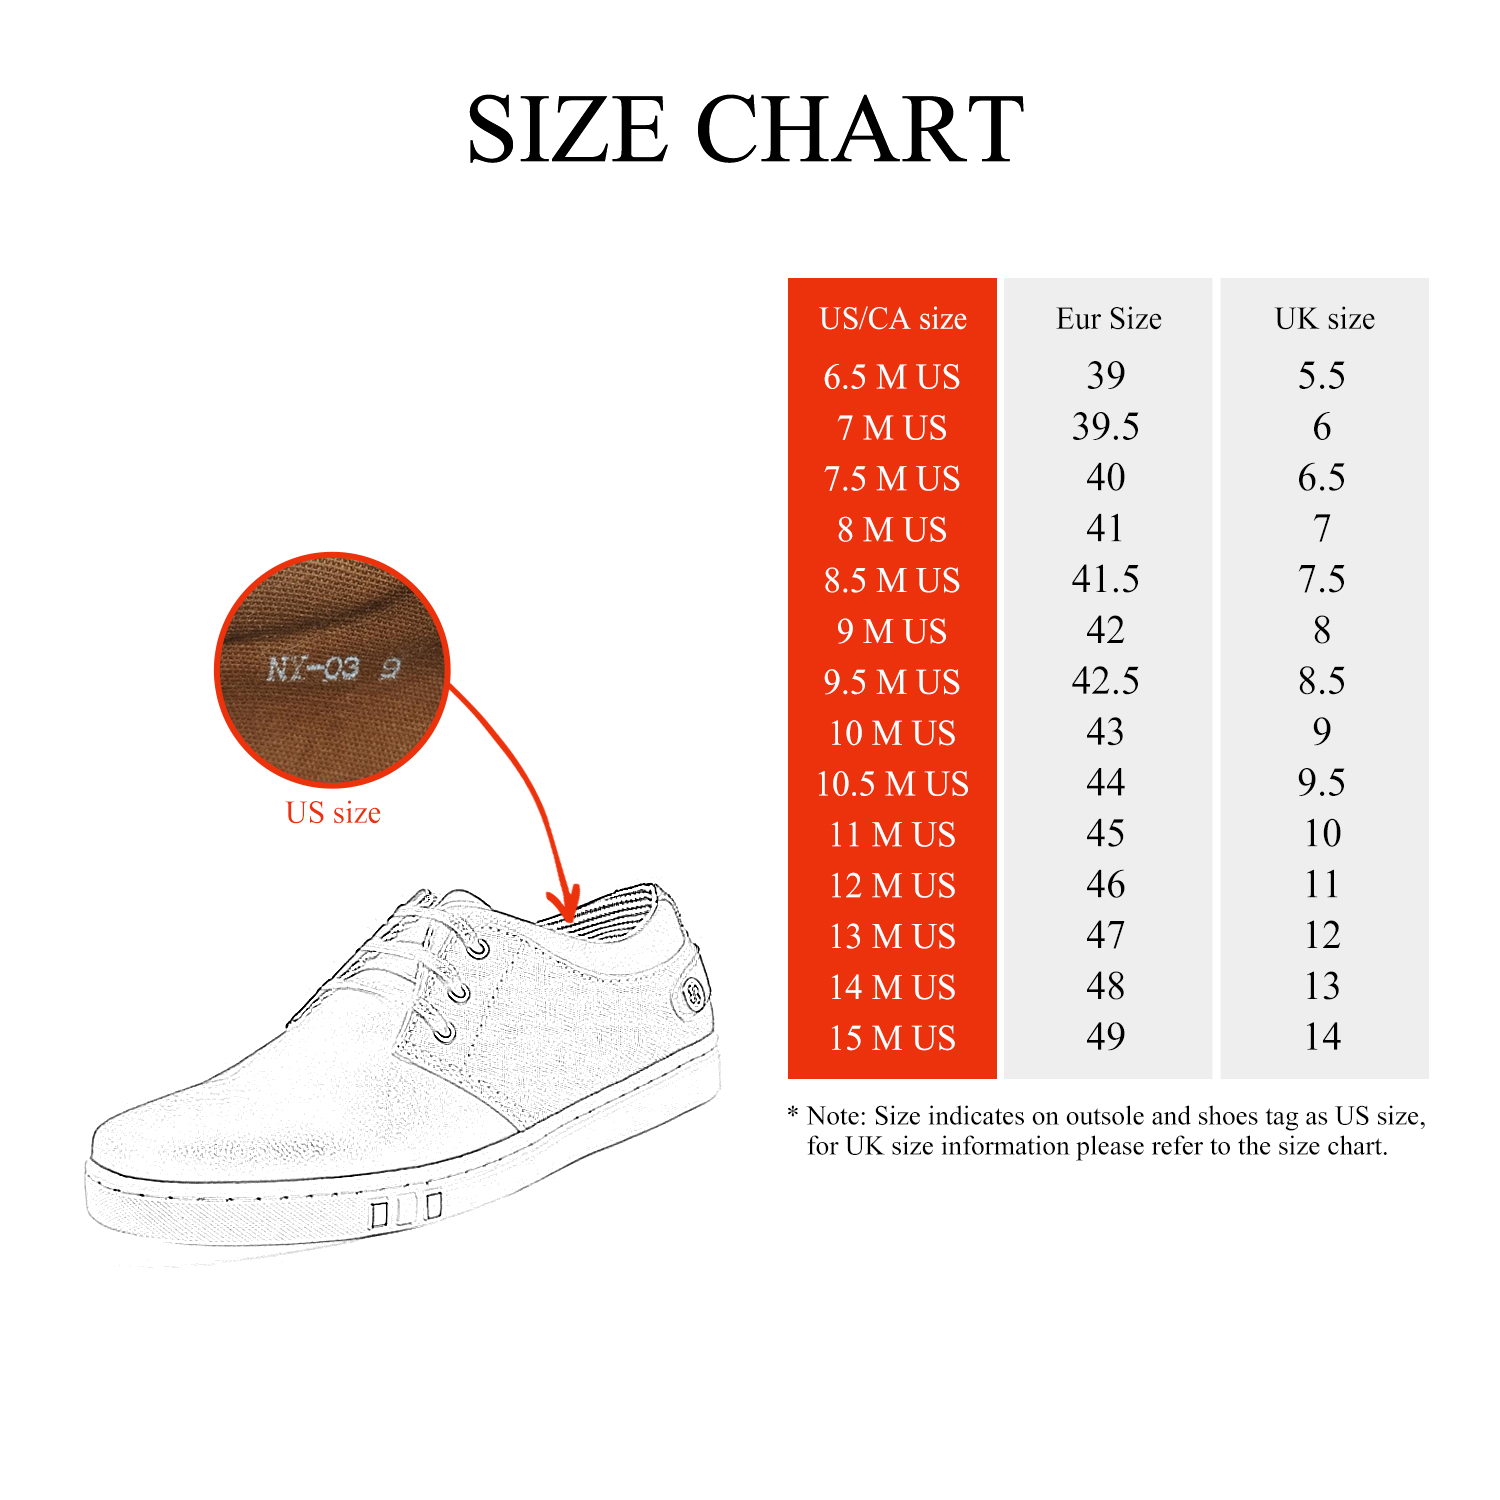 BRUNO MARC Mens Mesh Leather Sneakers Casual Shoes Slip On Lace Up Waking Shoes NY-03 BROWN 8 - image 4 of 4